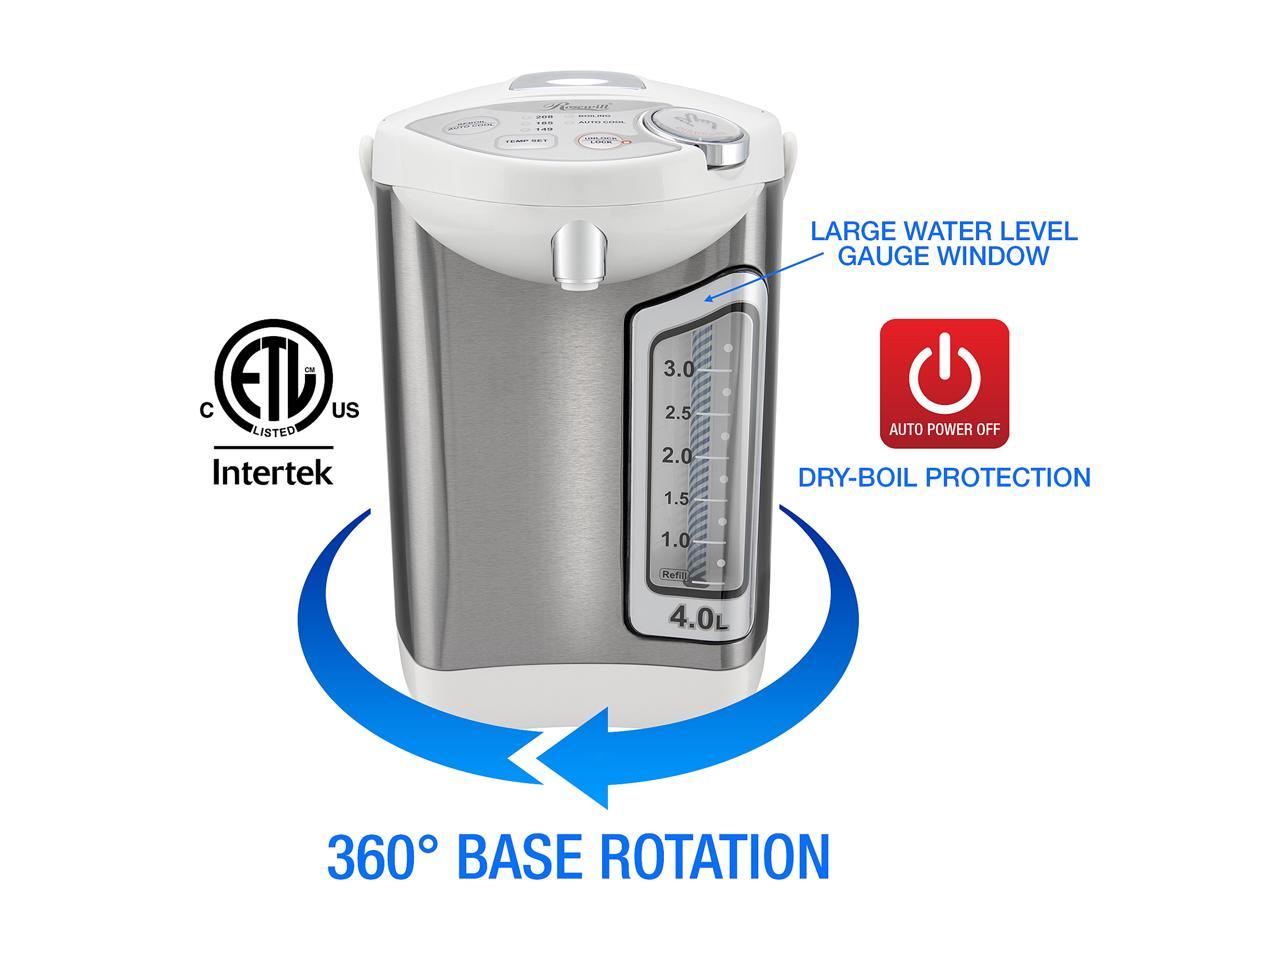 4.0 Liter Hot Water Dispenser R-HAP-15002 Stainless Steel / White Rosewill Electric Hot Water Boiler and Warmer 